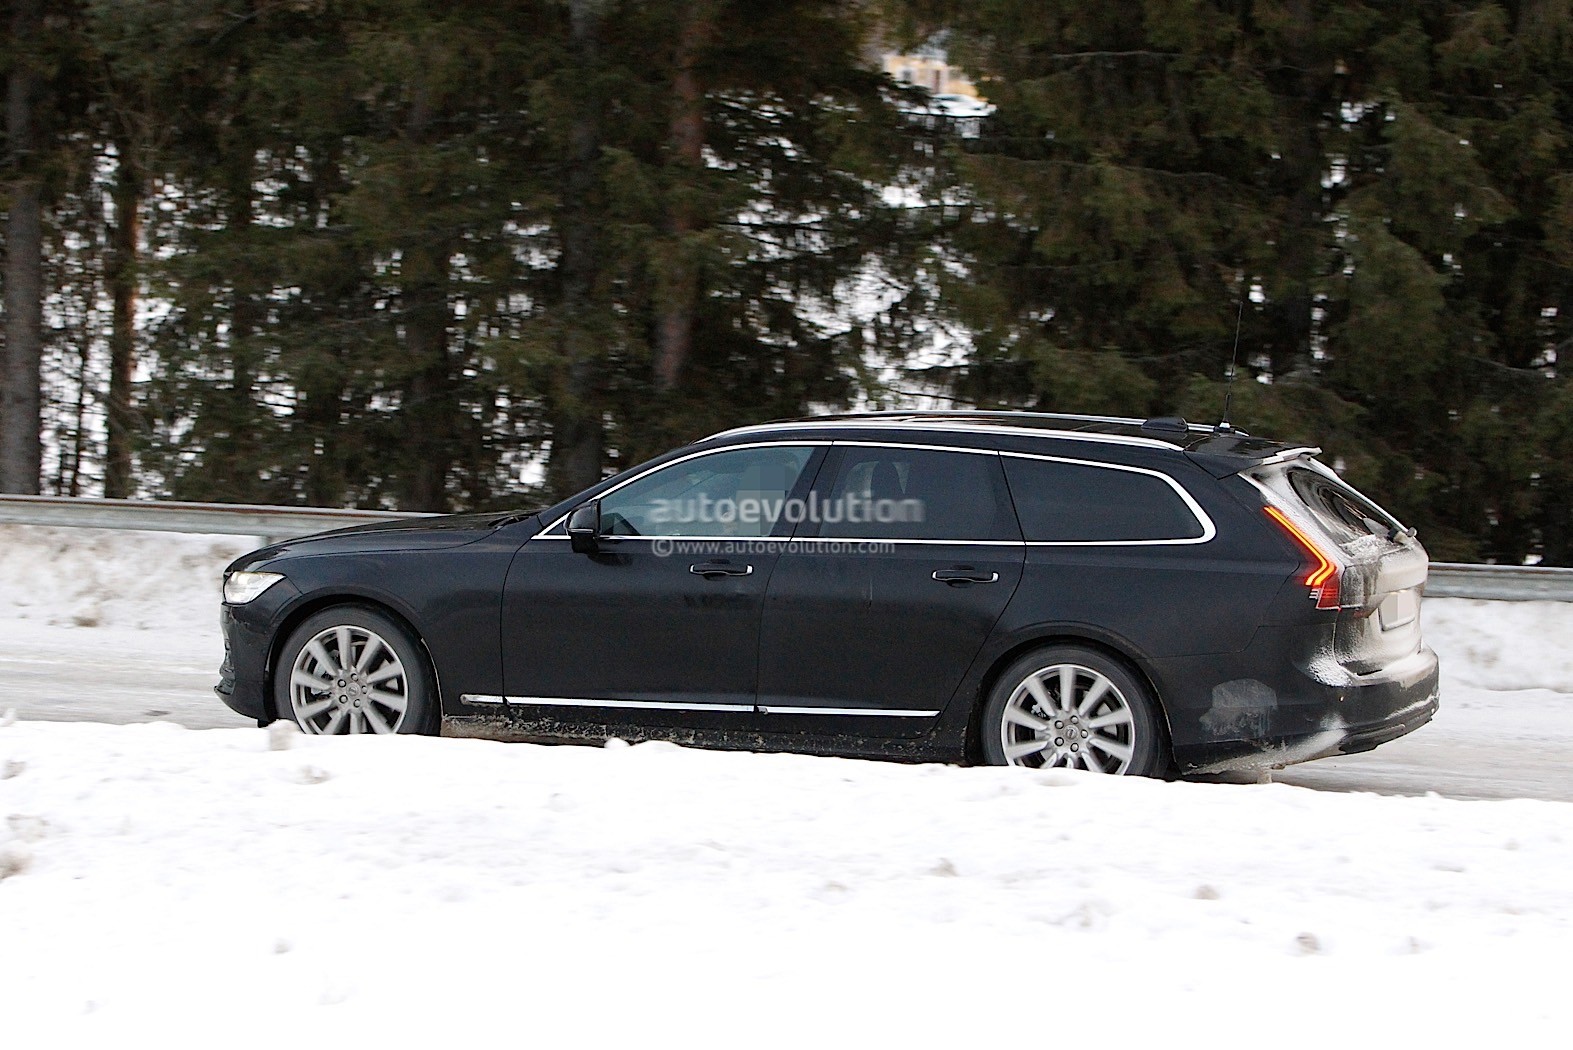 https://s1.cdn.autoevolution.com/images/news/gallery/2021-volvo-s90-and-v90-facelift-wear-useless-camouflage-winter-testing_9.jpg